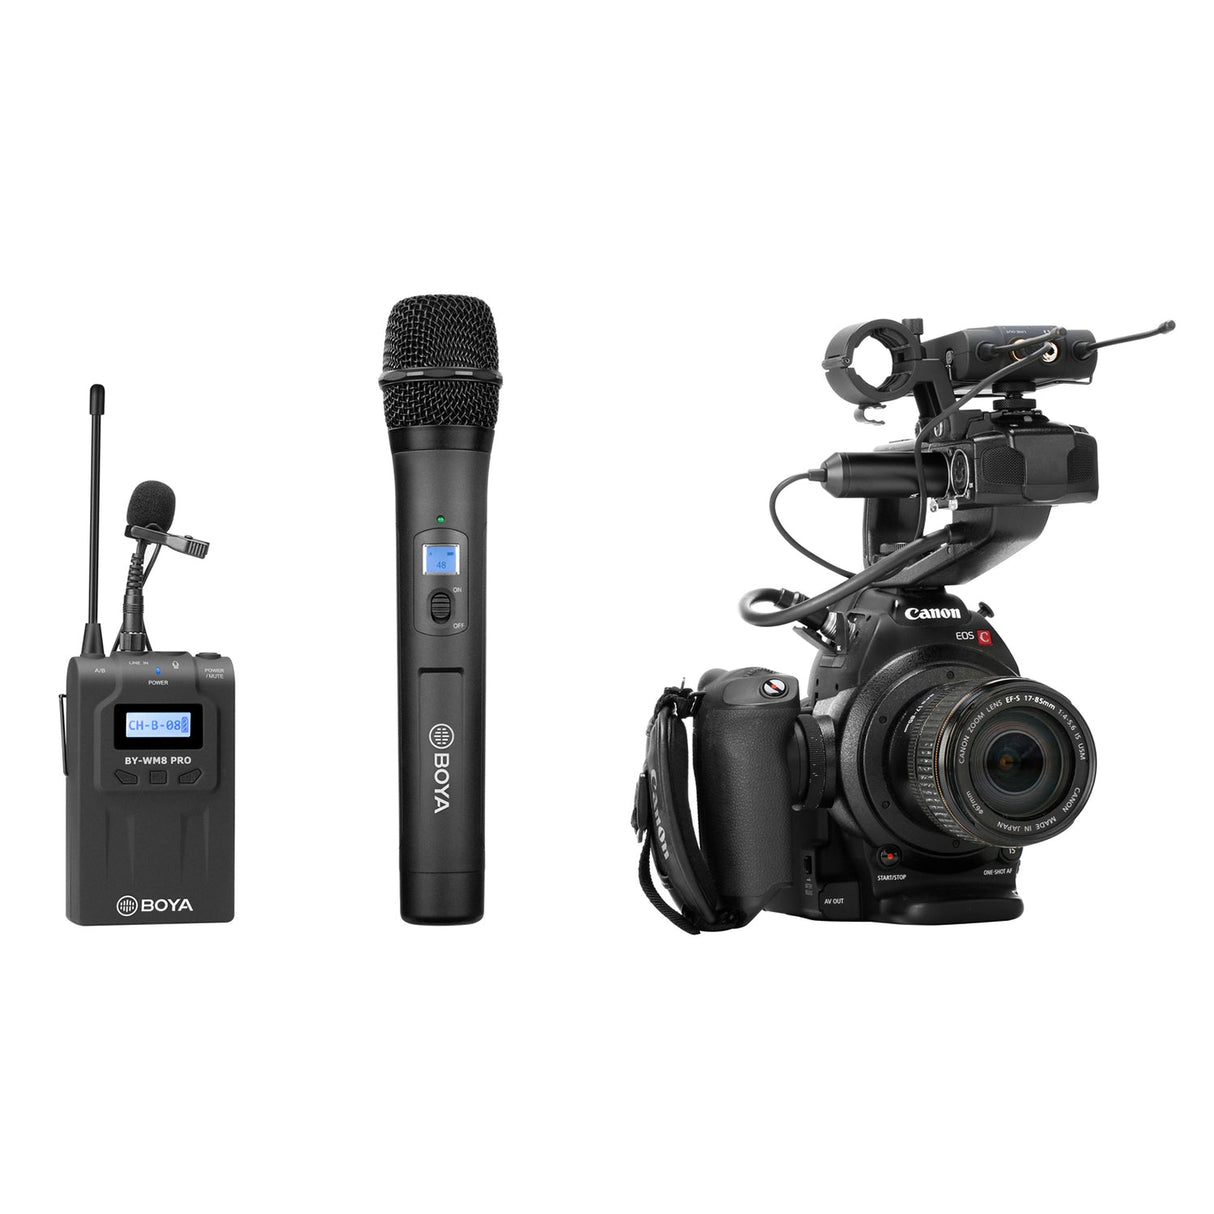 BOYA BY-WM8 Pro-K4 Dual Channel Wireless Microphone Kit, Includes BY-WHM8 Pro Handheld and BY-WM8 Pro-K1 Transmitter and Receiver